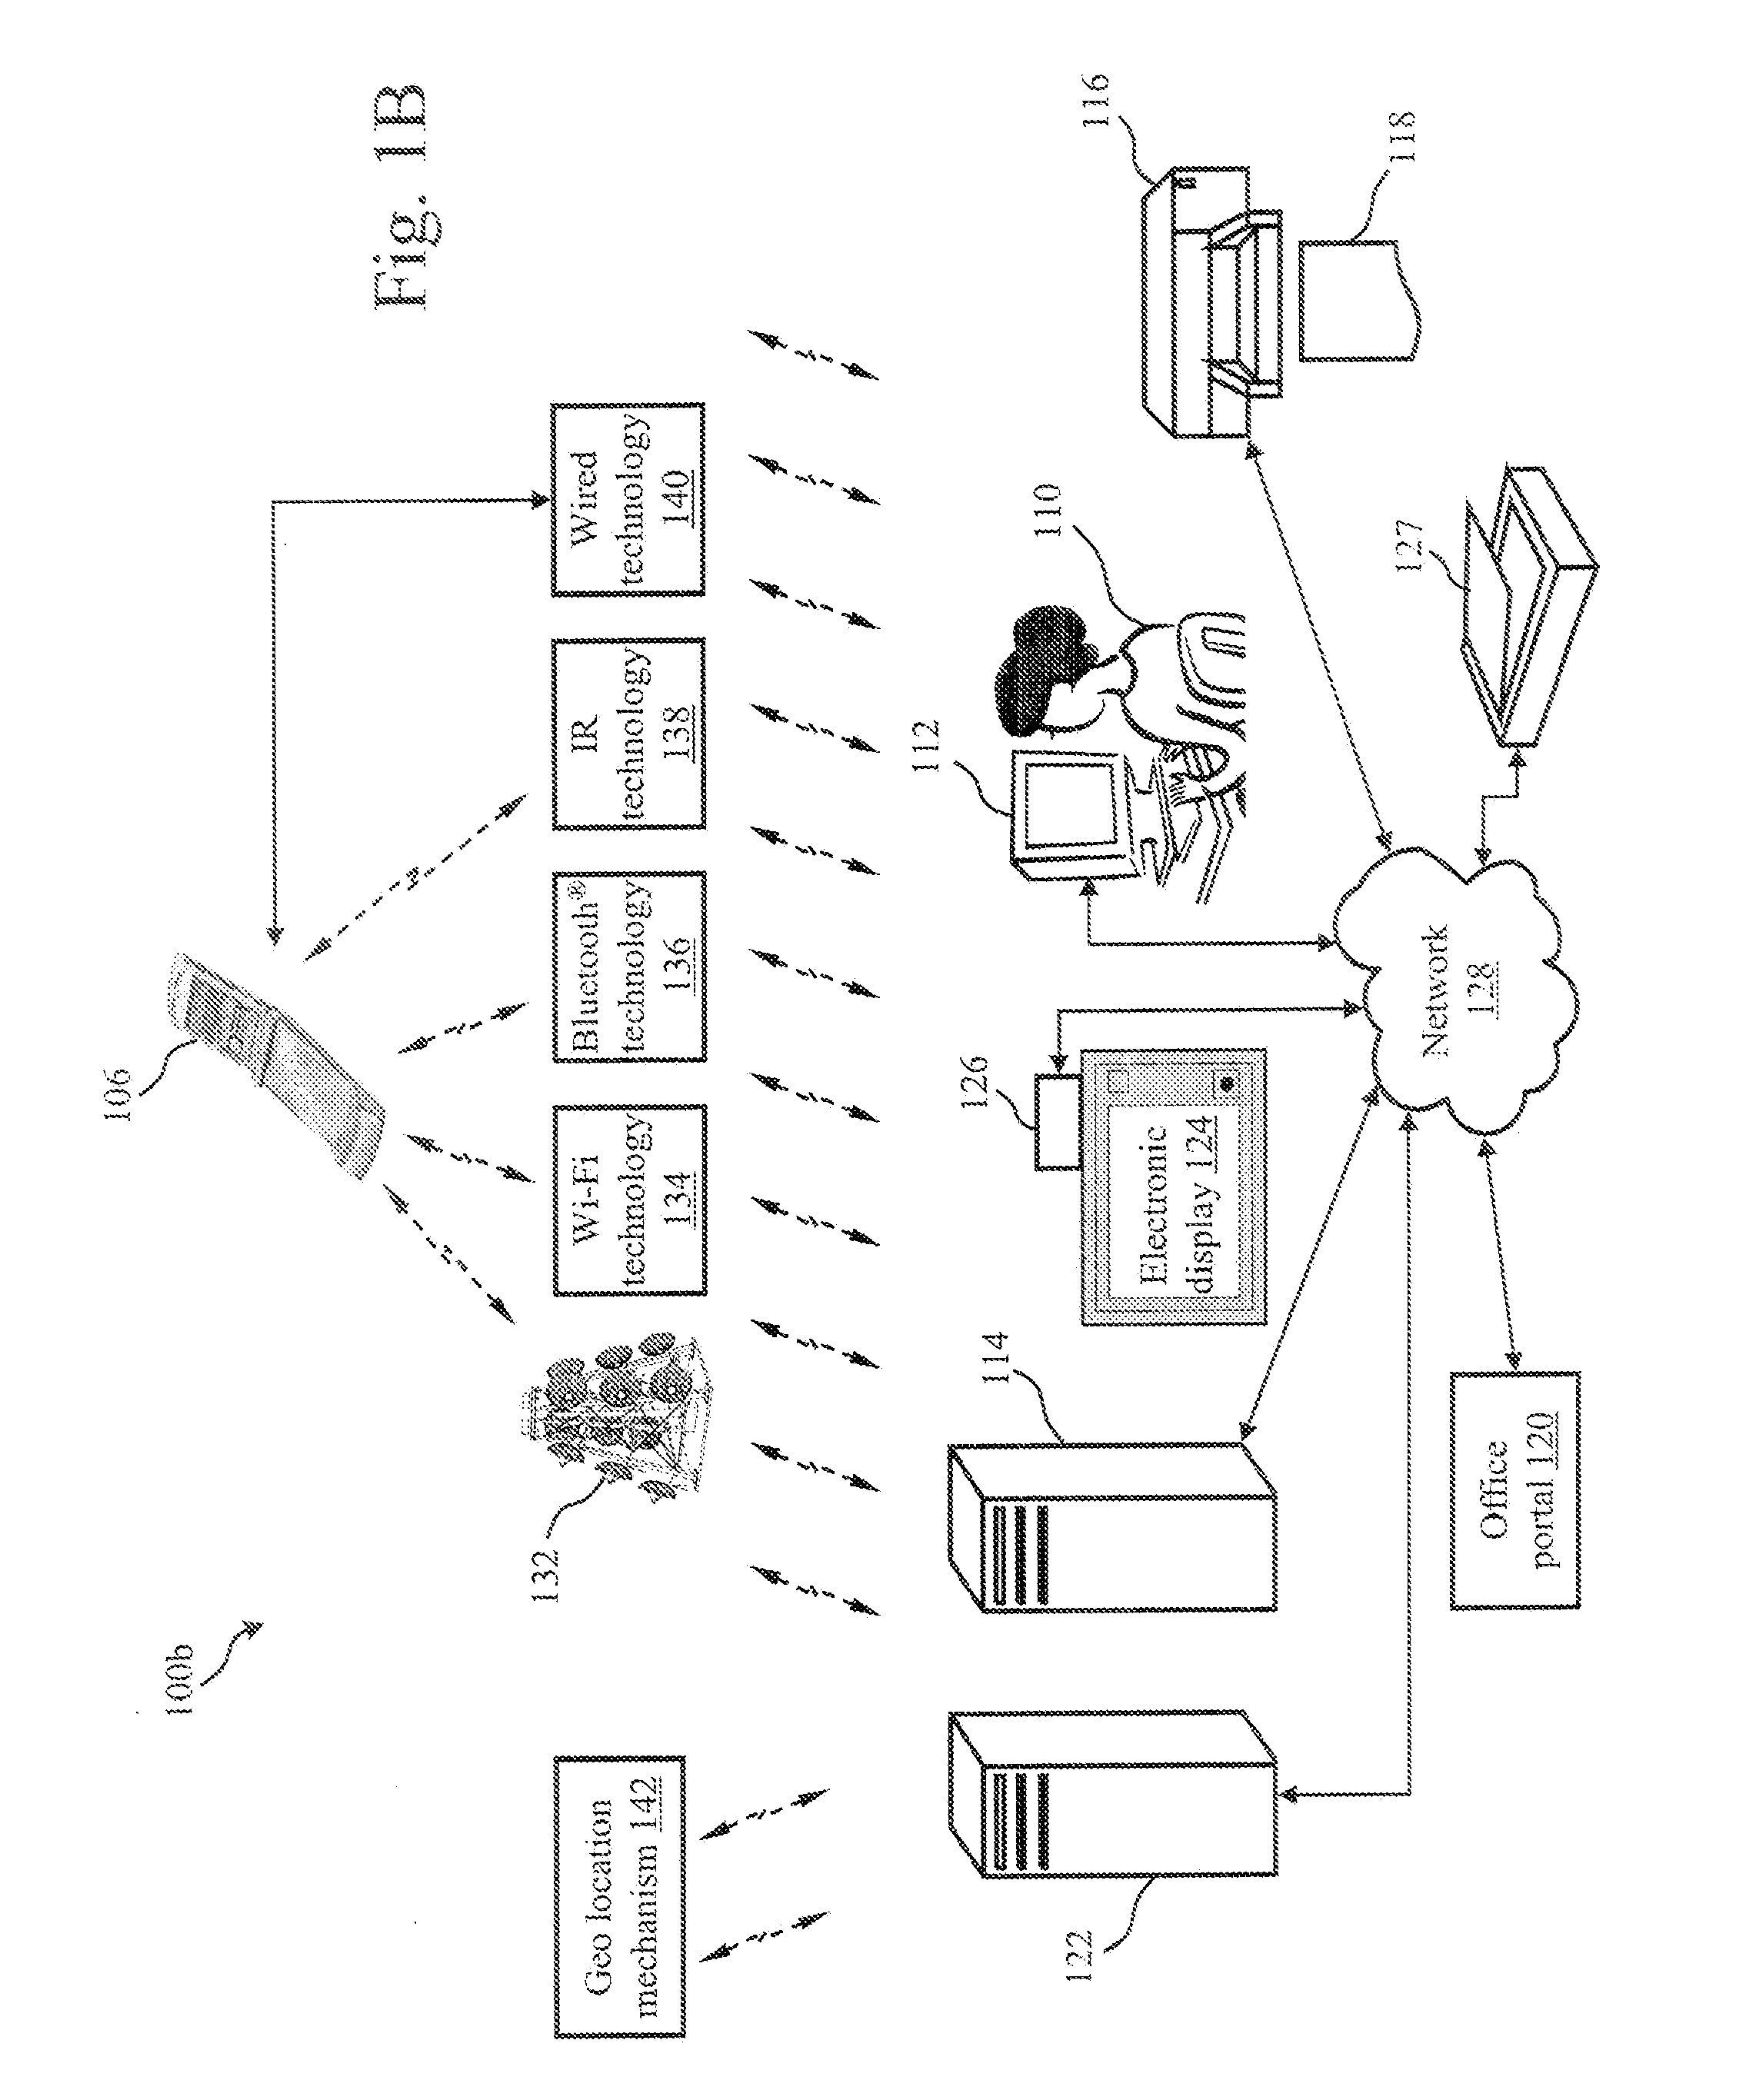 Method And System For Document Fingerprint Matching In A Mixed Media Environment